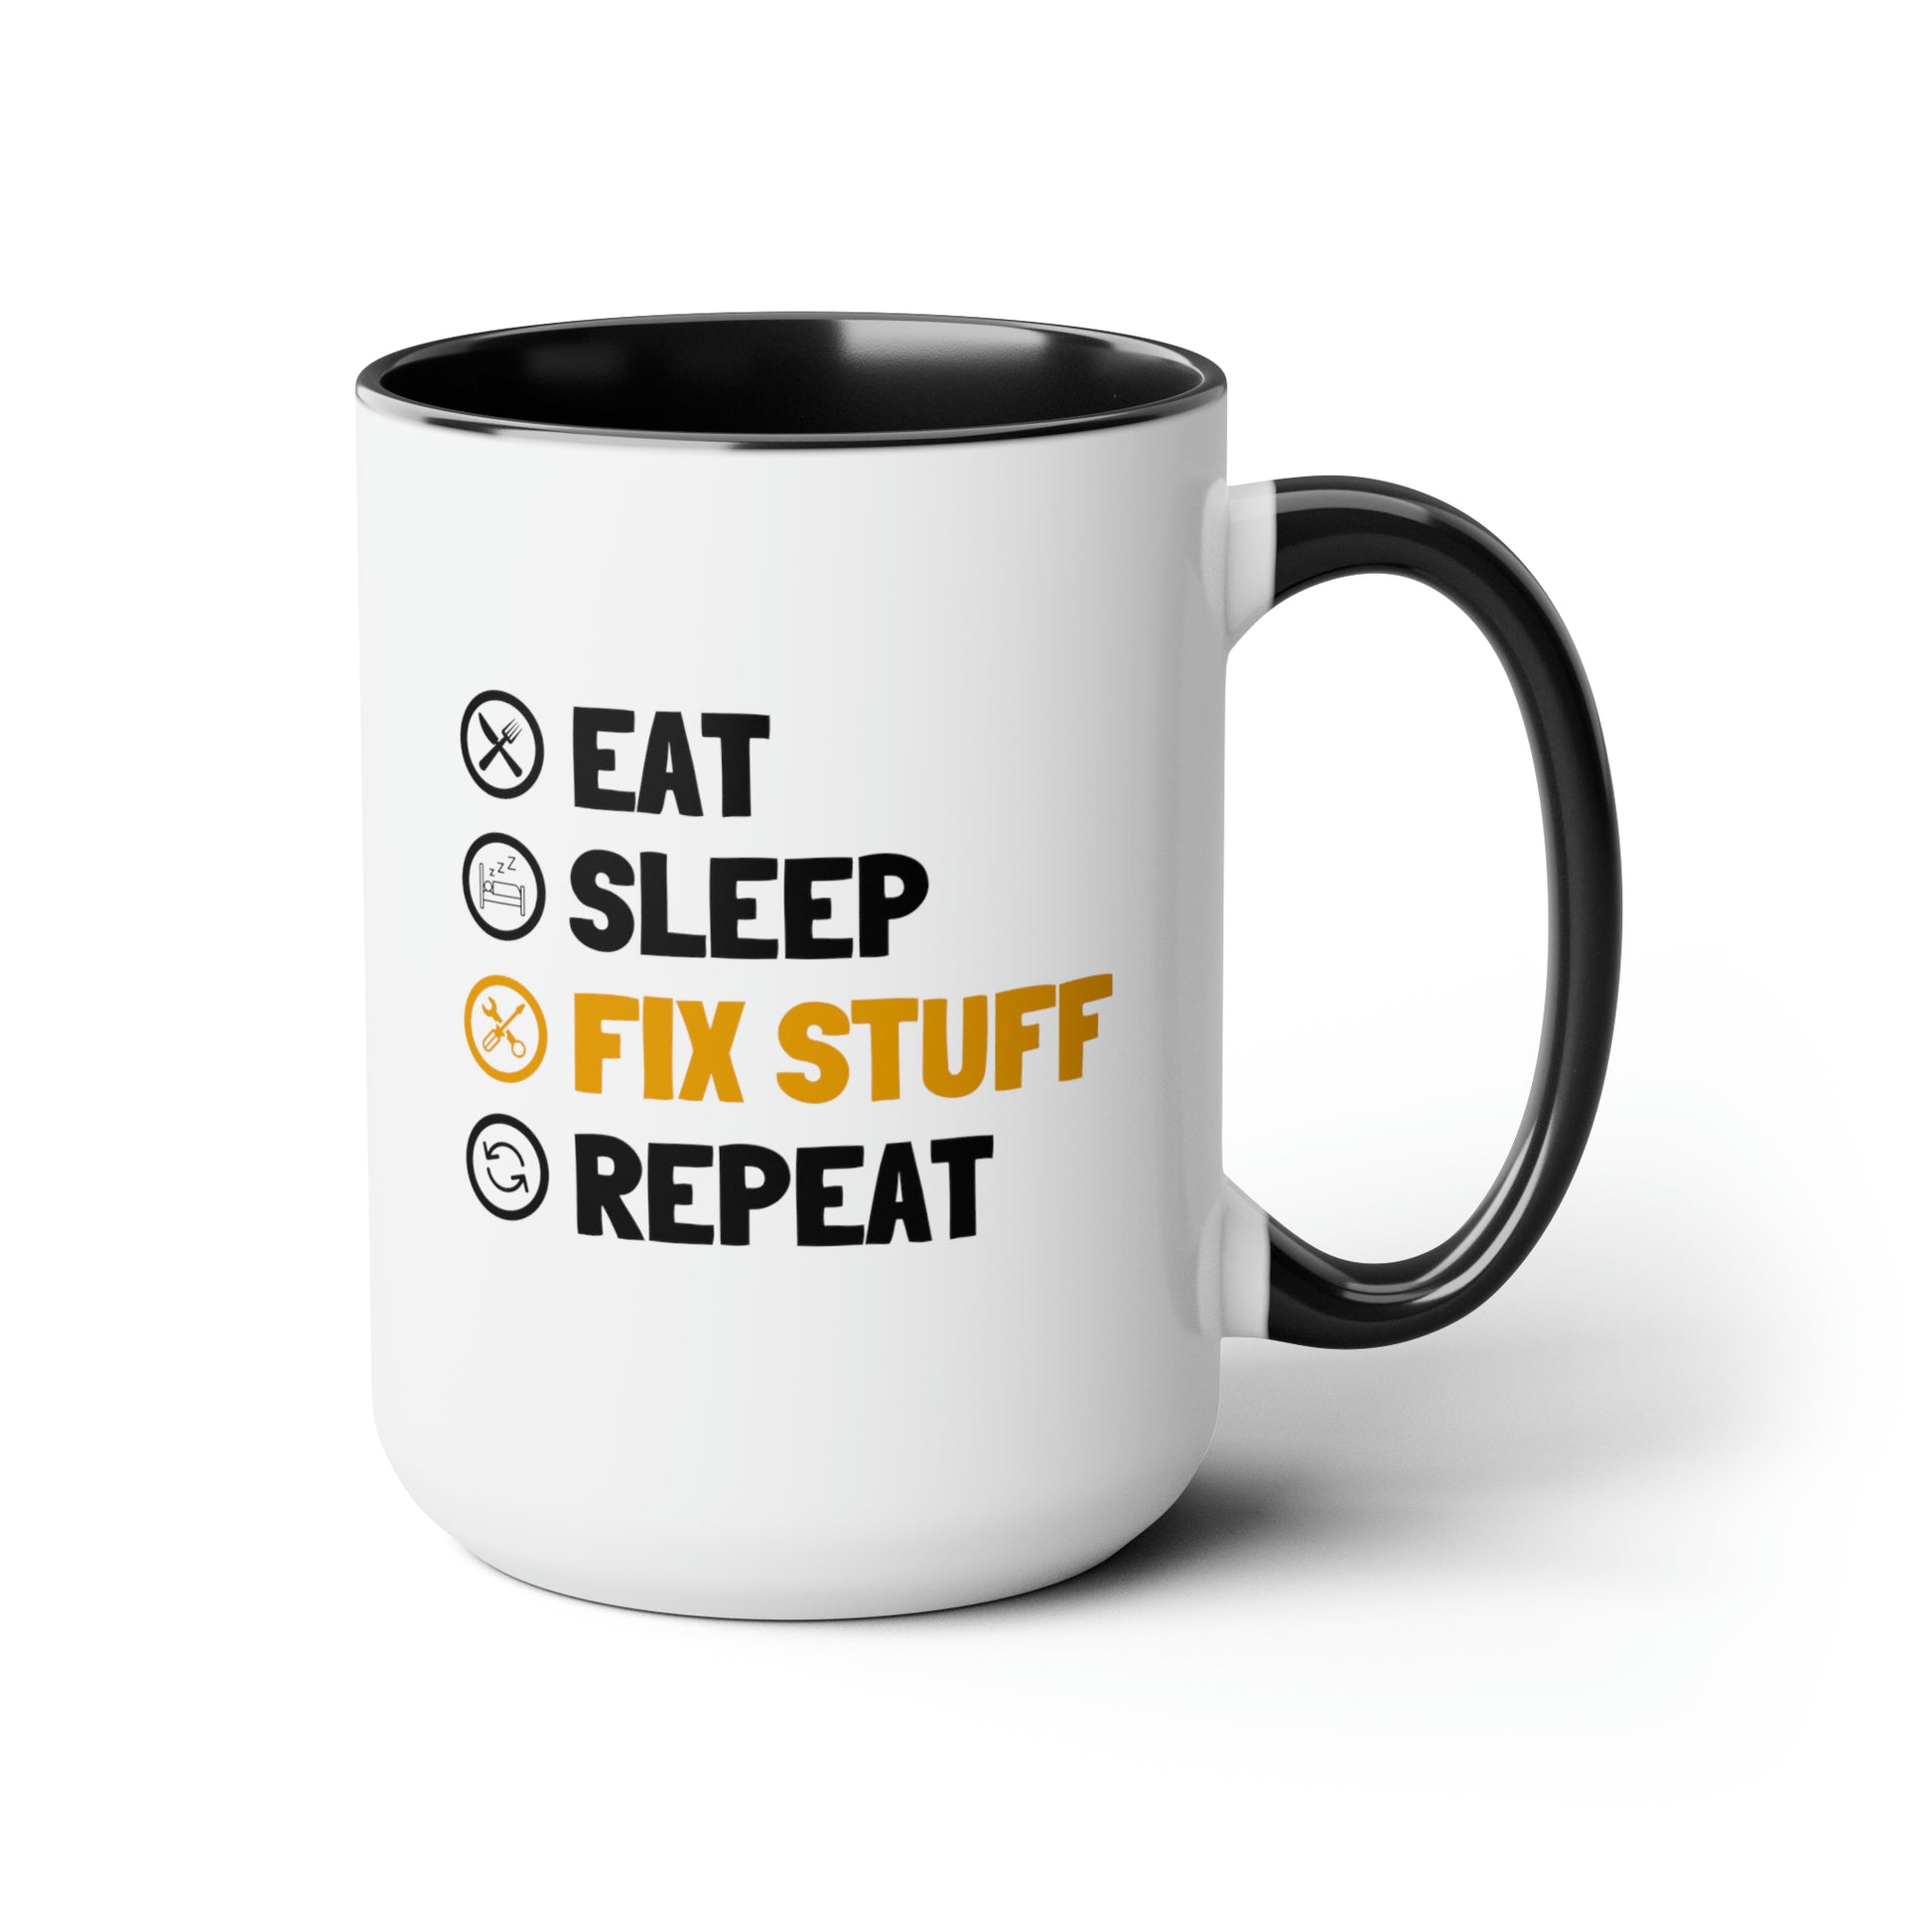 Eat Sleep Fix Stuff Repeat 15oz white with black accent funny large coffee mug gift for dad husband birthday christmas men fathers day waveywares wavey wares wavywares wavy wares